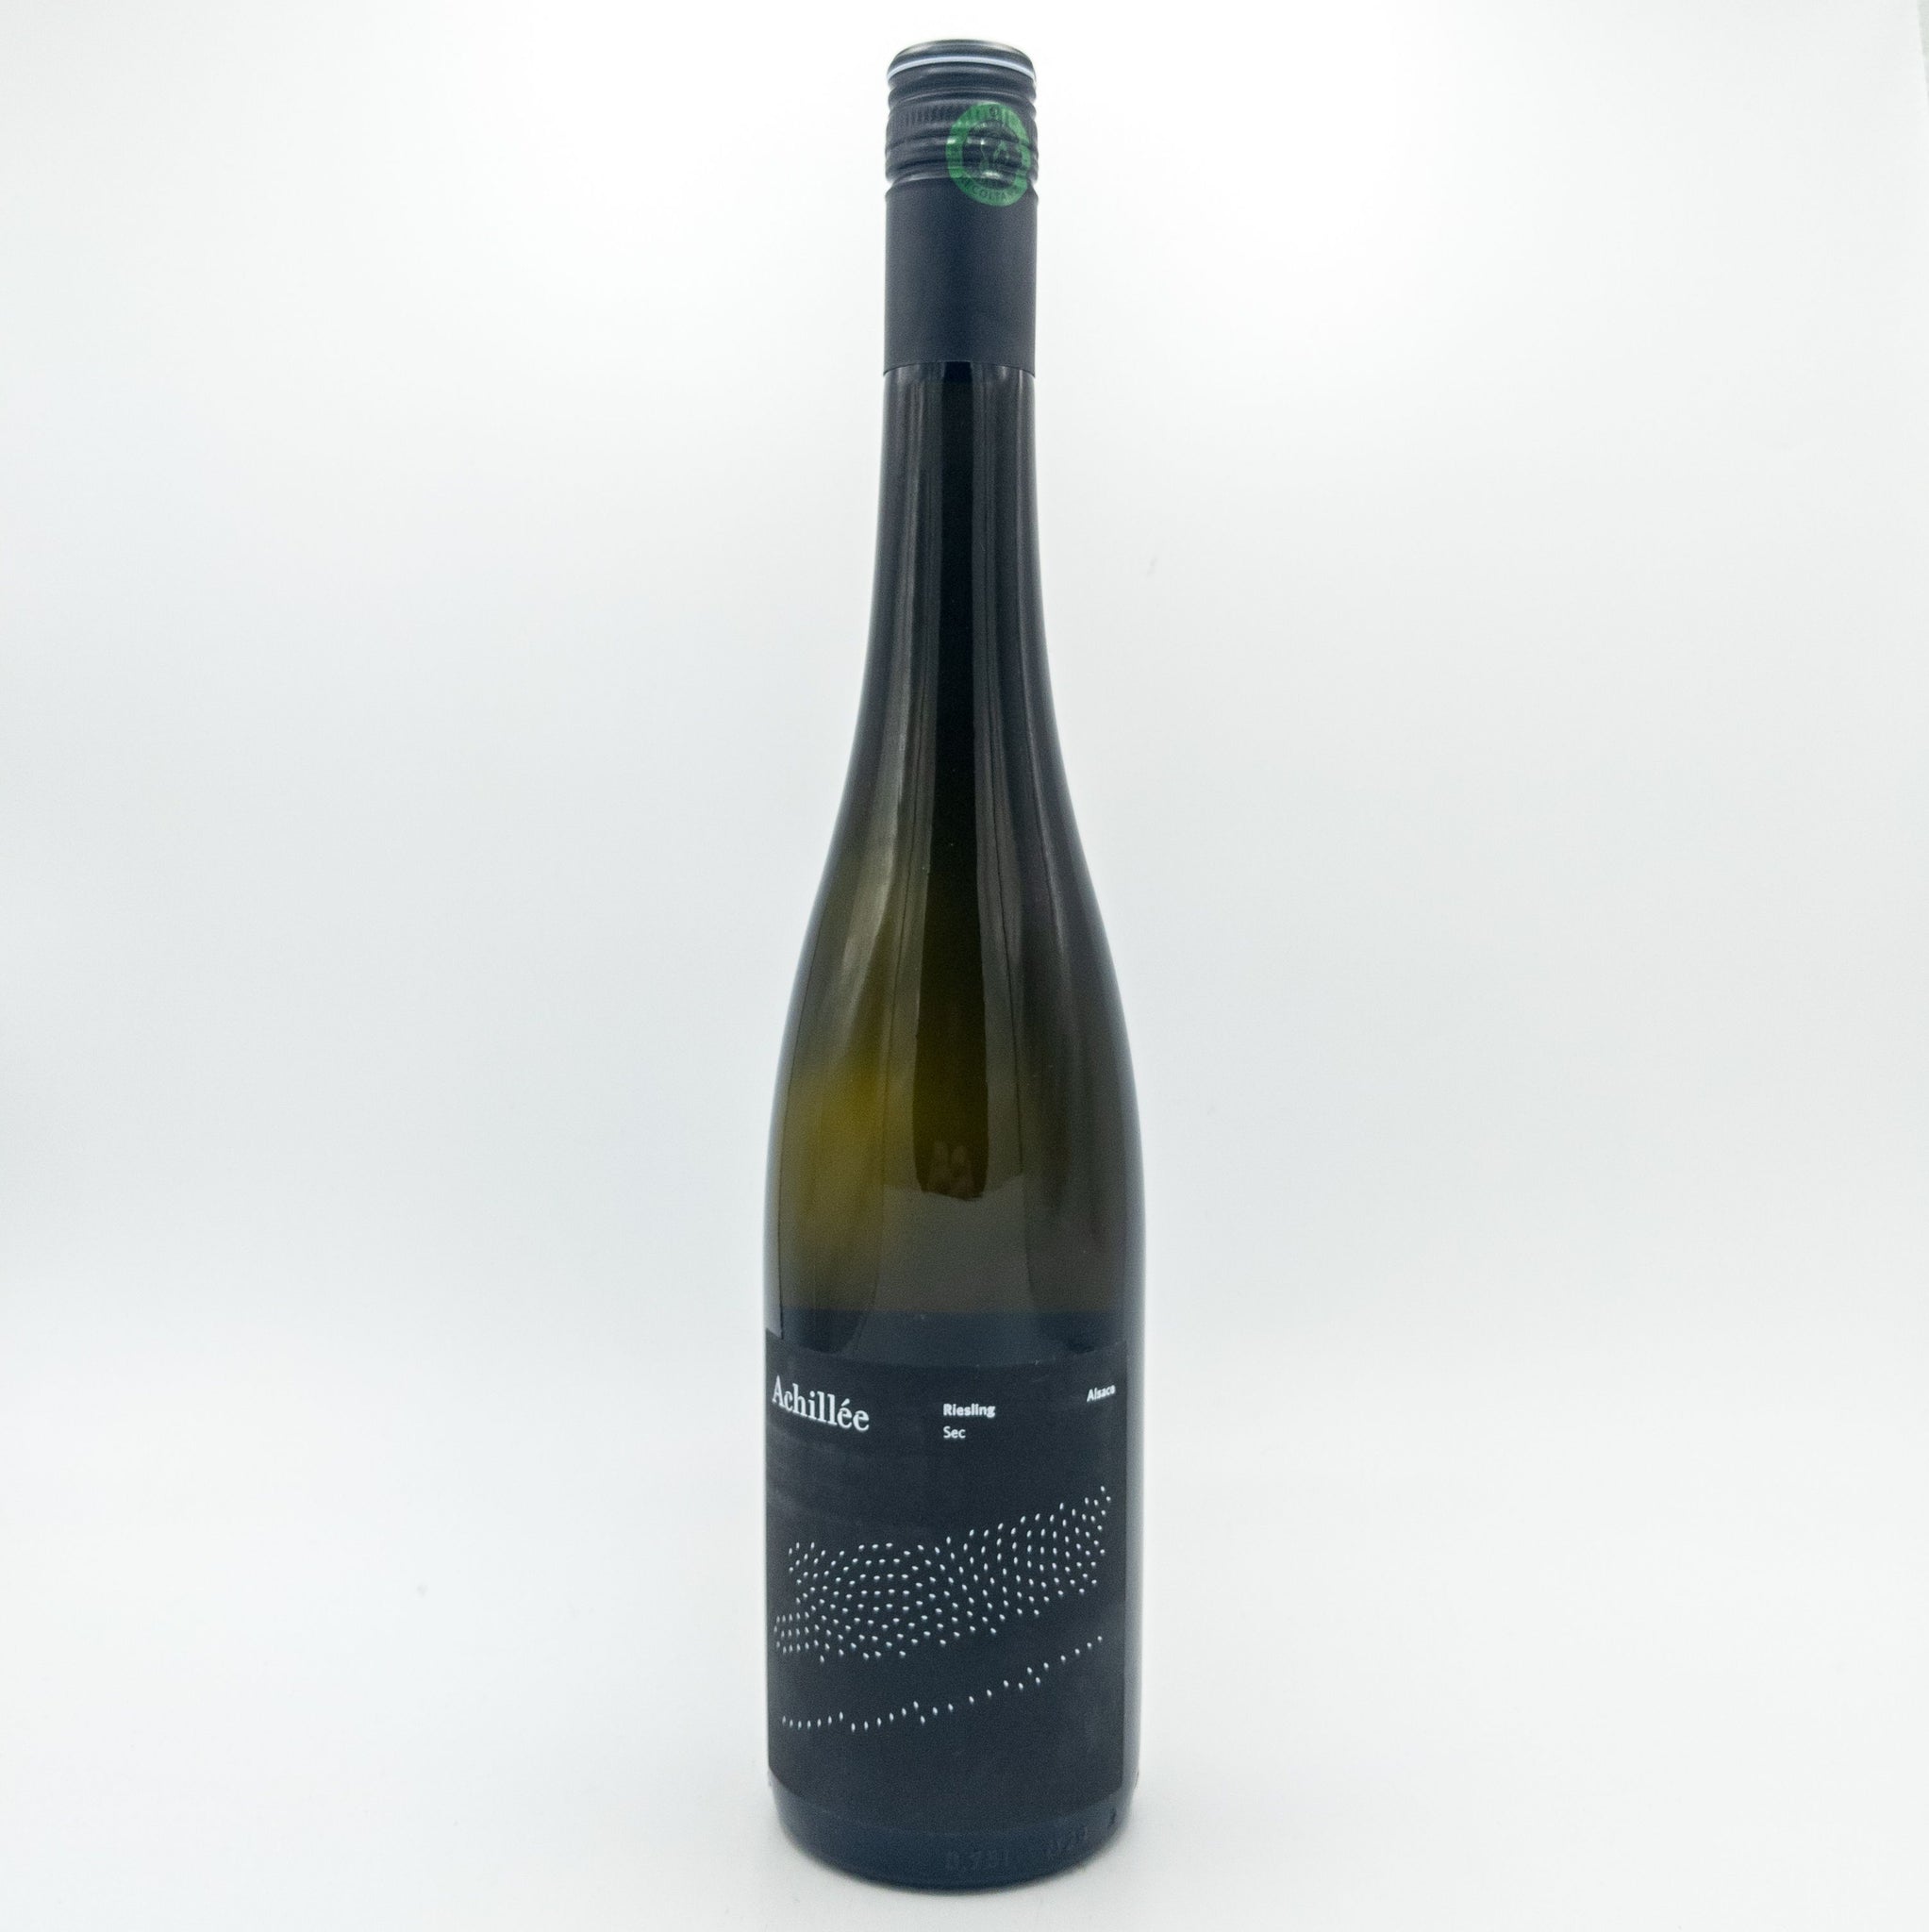 Achillee 'Riesling' 2021